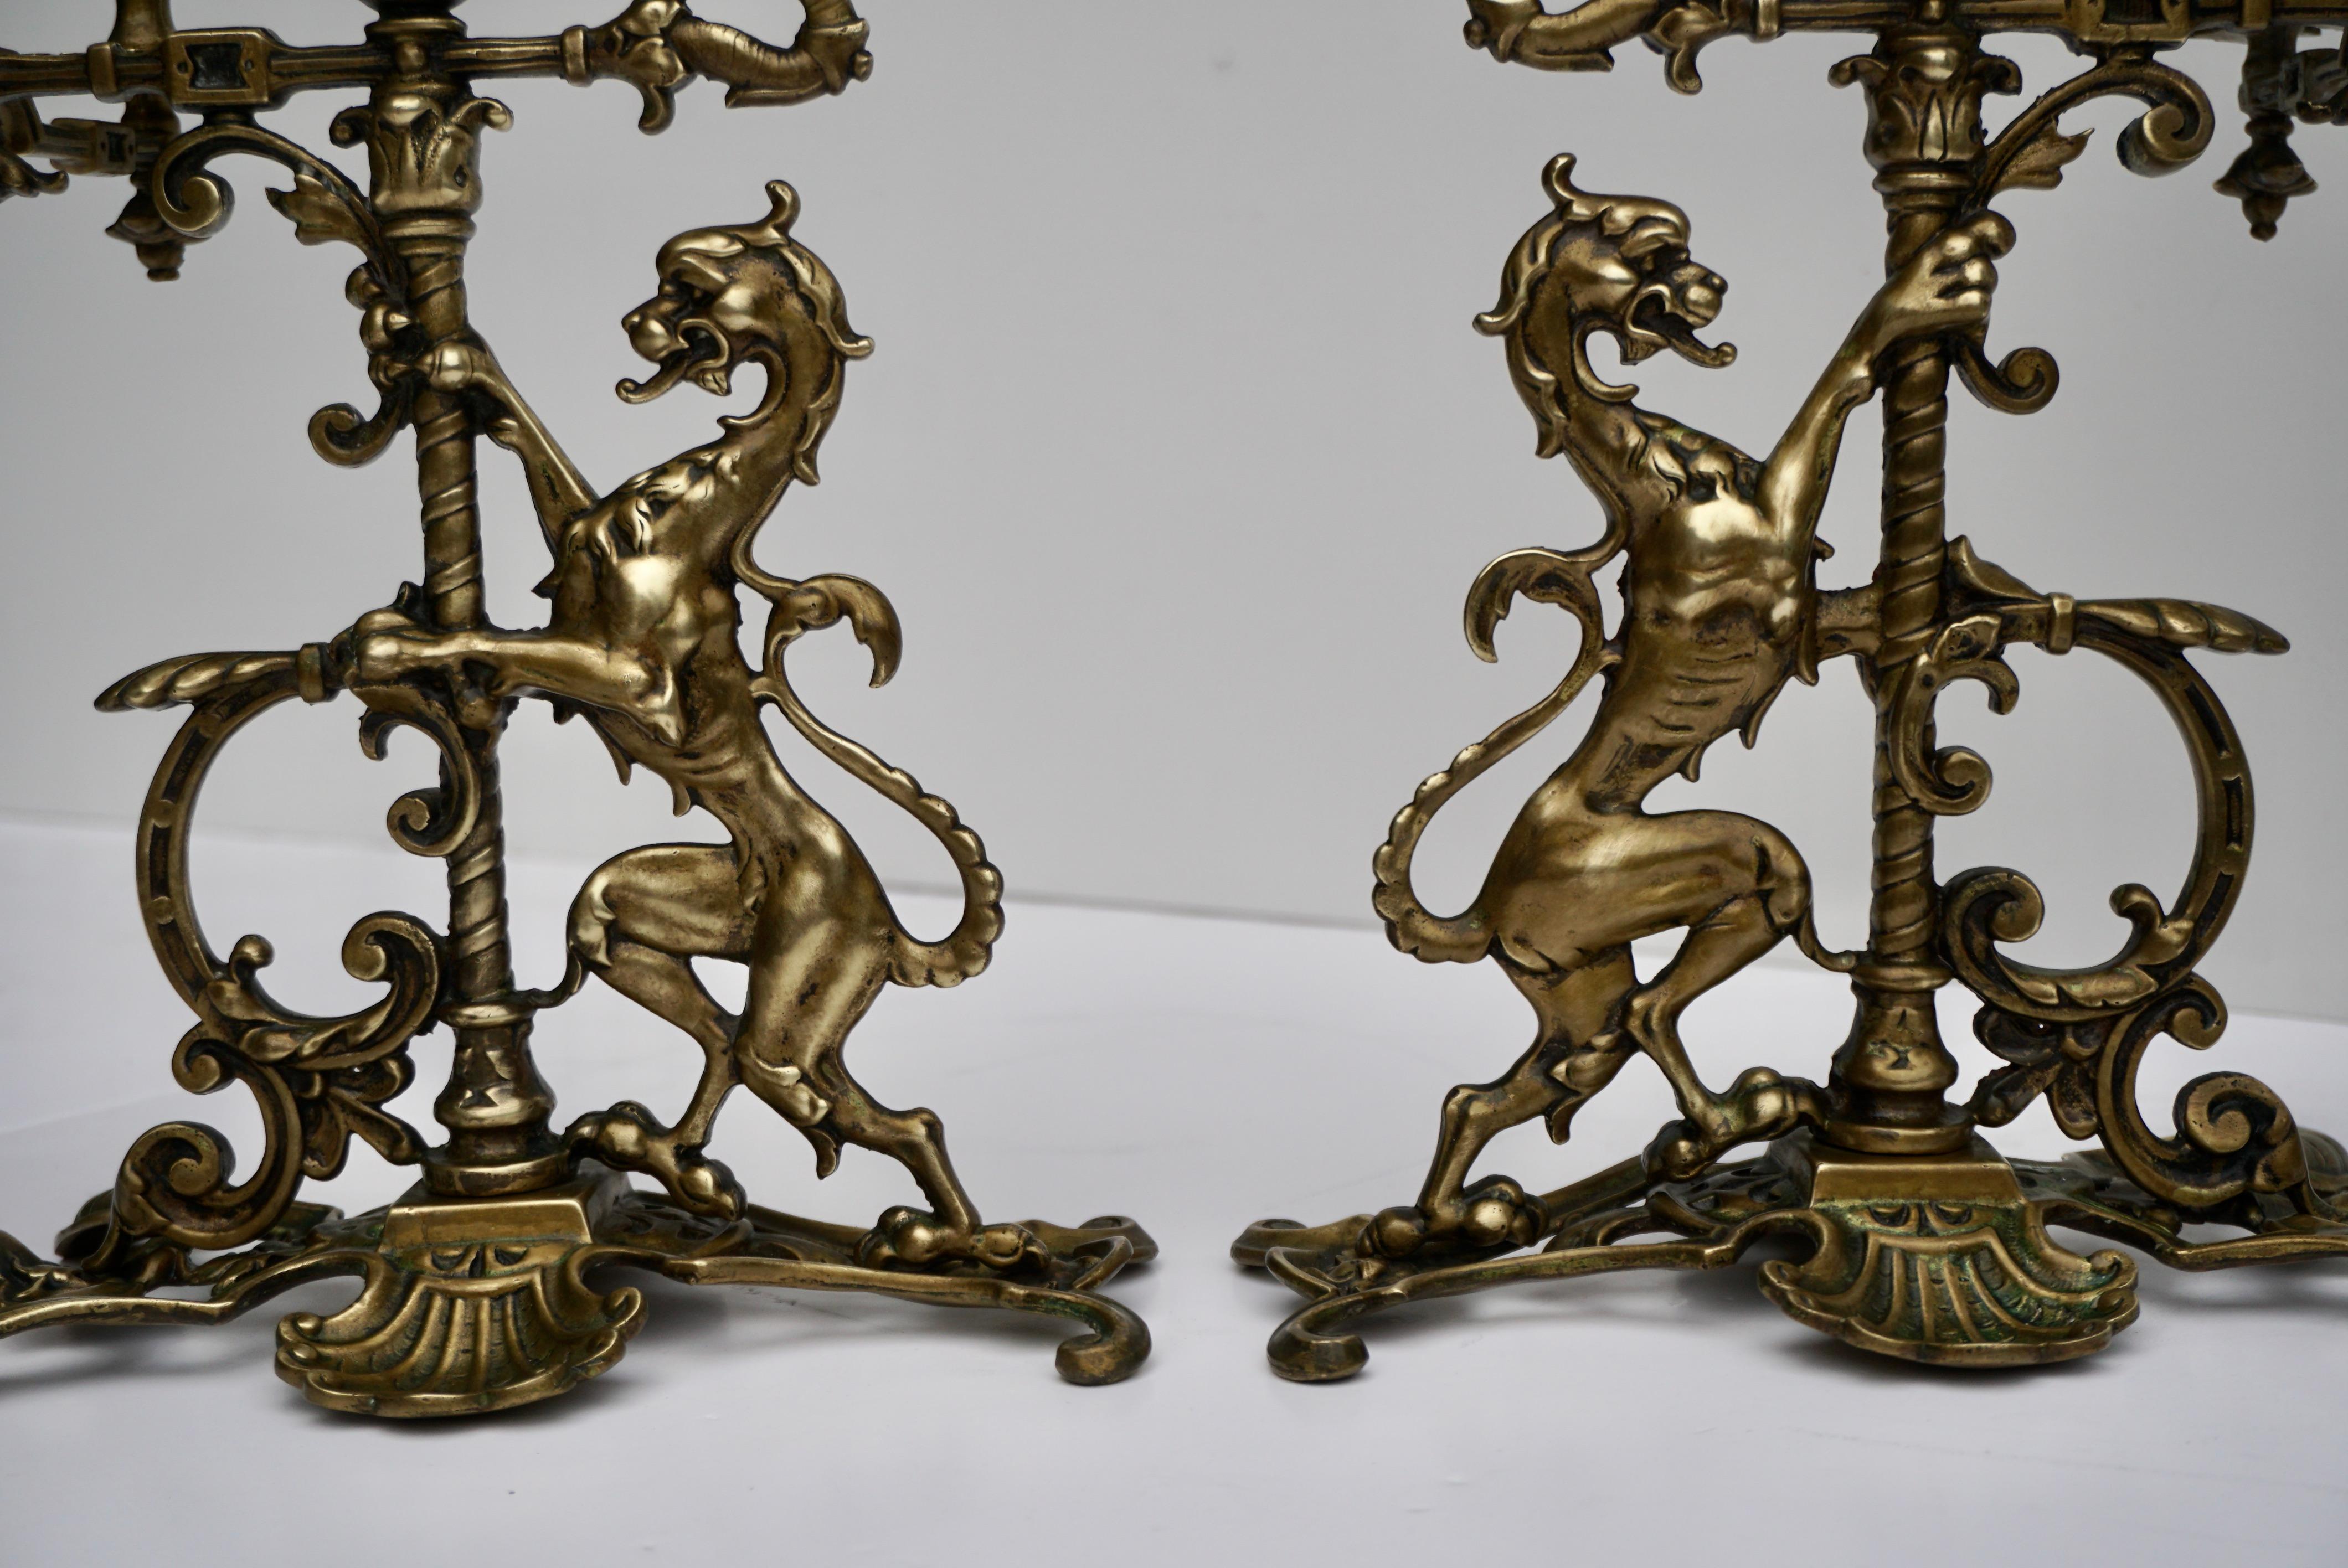 20th Century Pair of Brass Figural Candelabra with Dragons